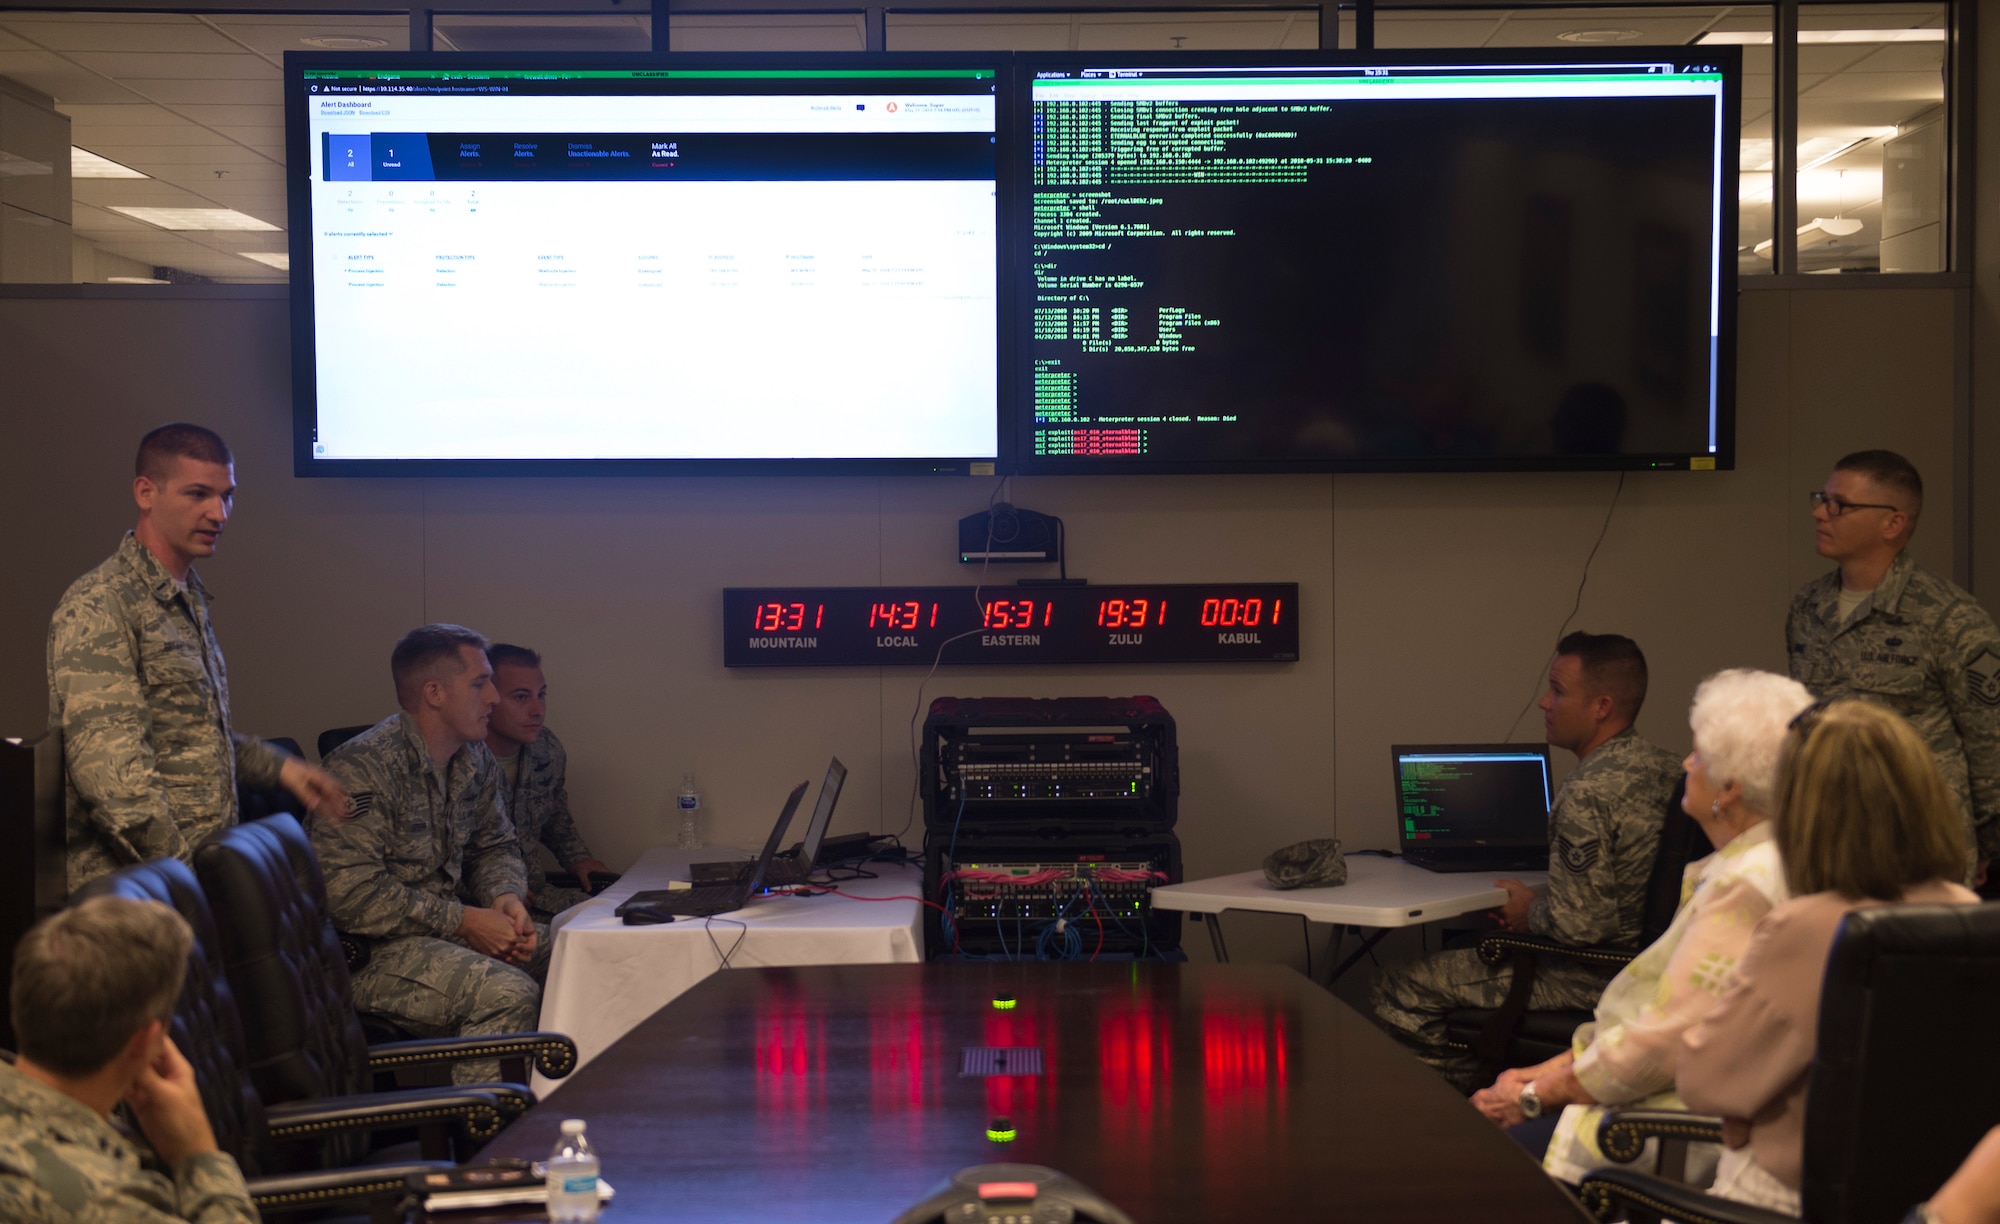 Airmen from the 836th Cyberspace Operations Squadron discuss defensive cyberspace operations during a civic leader tour at Joint Base San Antonio-Lackland, Texas, May 31, 2018. The civic leaders visited the base with Gen. Mike Holmes, commander Air Combat Command, to introduce them to 24th Air Force’s cyberspace mission and 25th AF’s intelligence, surveillance and reconnaissance mission. (U.S. Air Force photo by Tech. Sgt. R.J. Biermann)